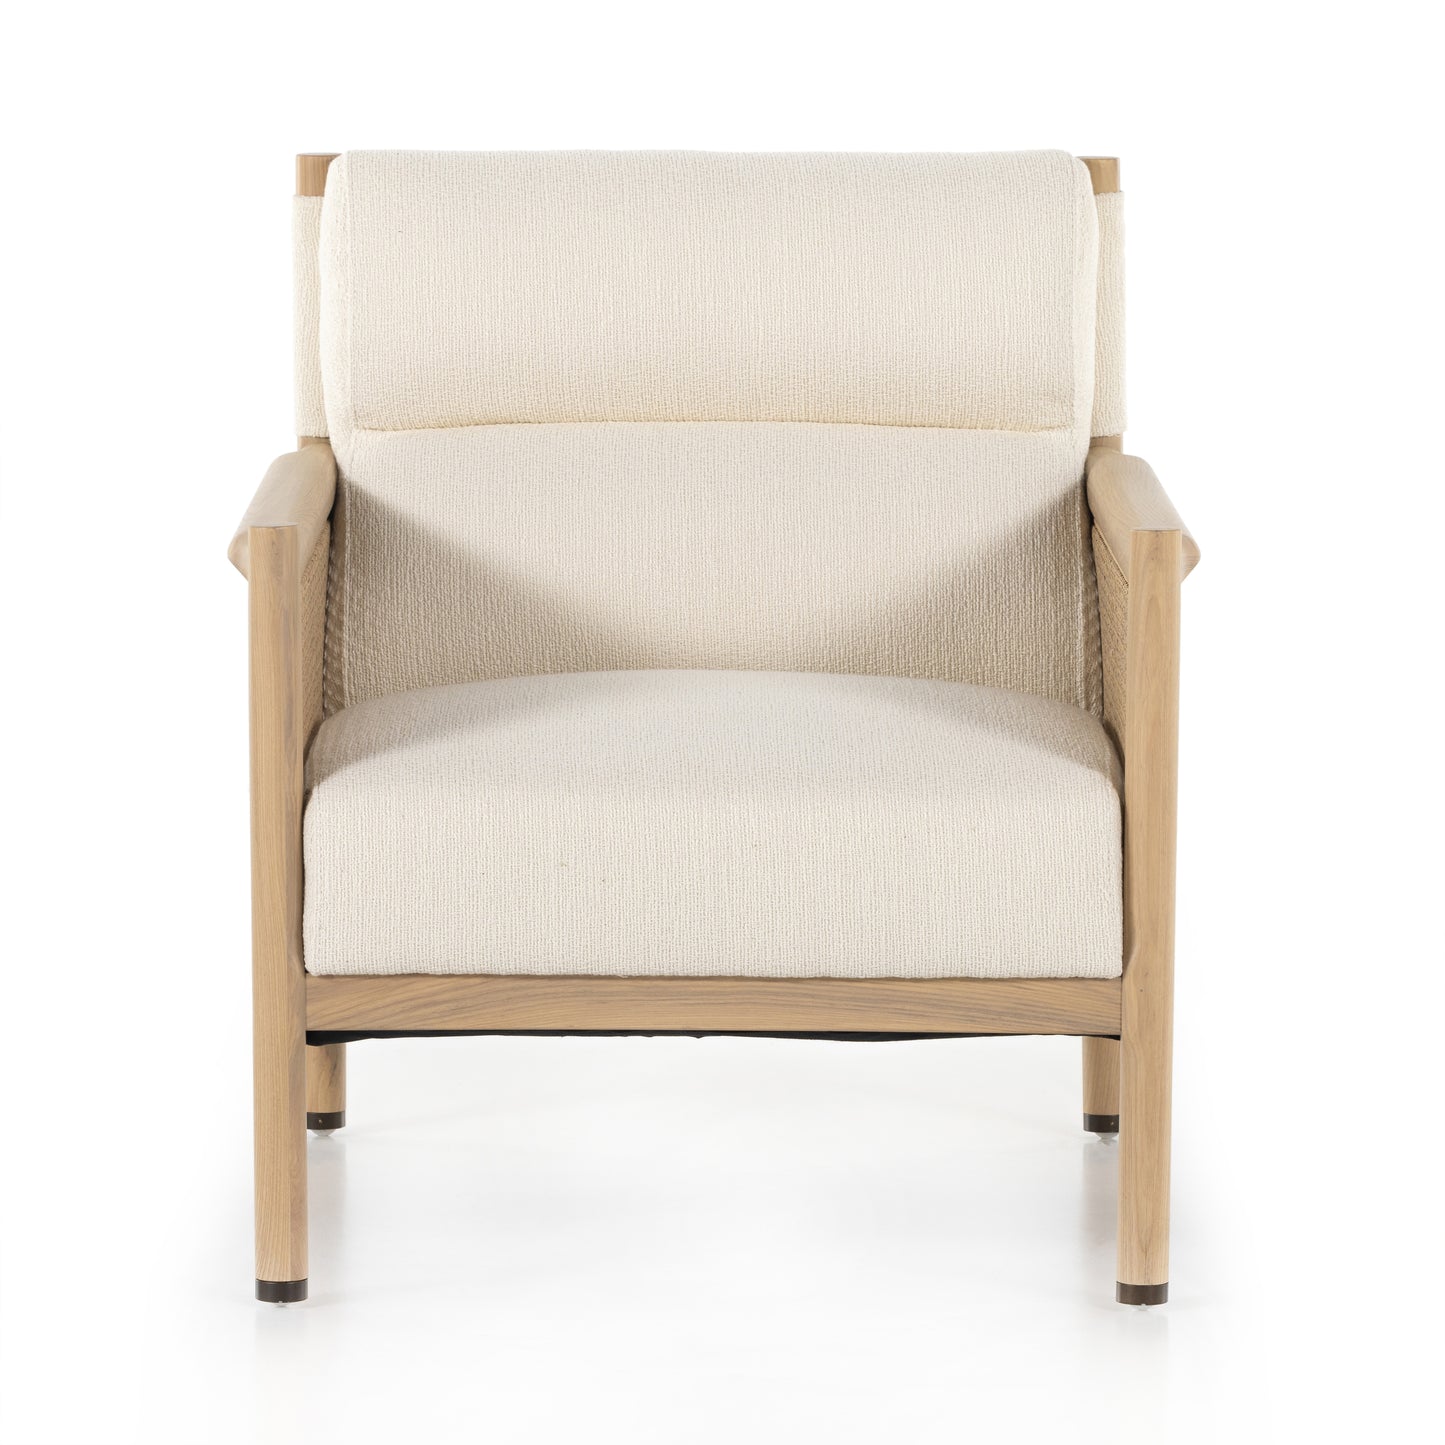 Kempsey Chair - Kerby Ivory